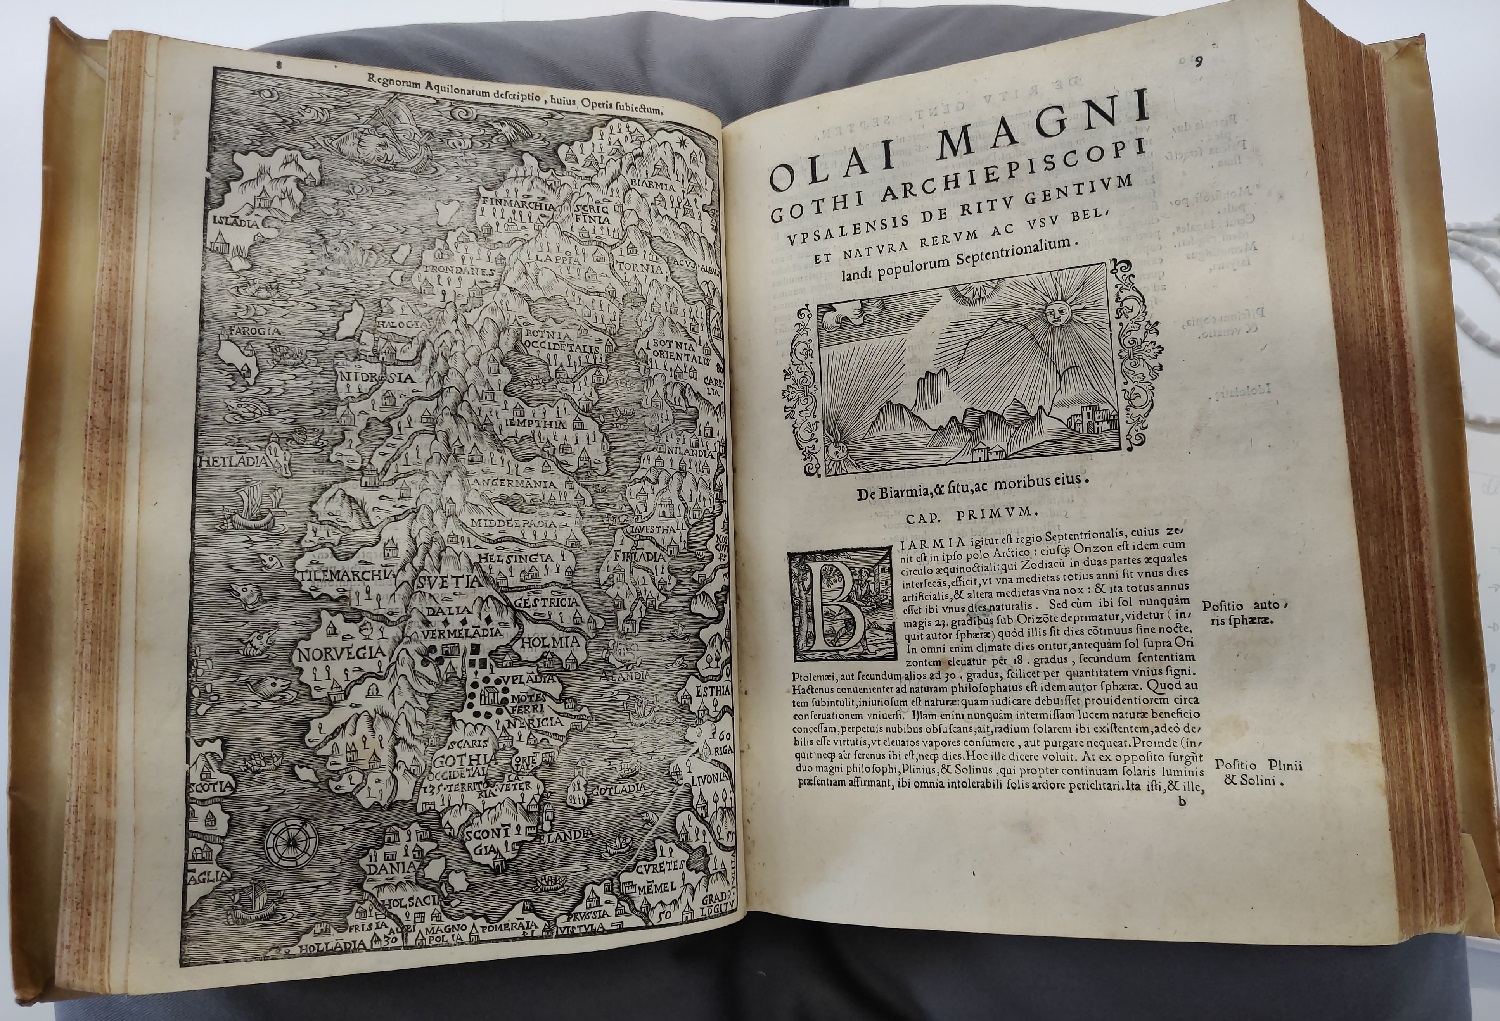 Image 3: Map included in the Historia and the opening page of Book I, Chapter I